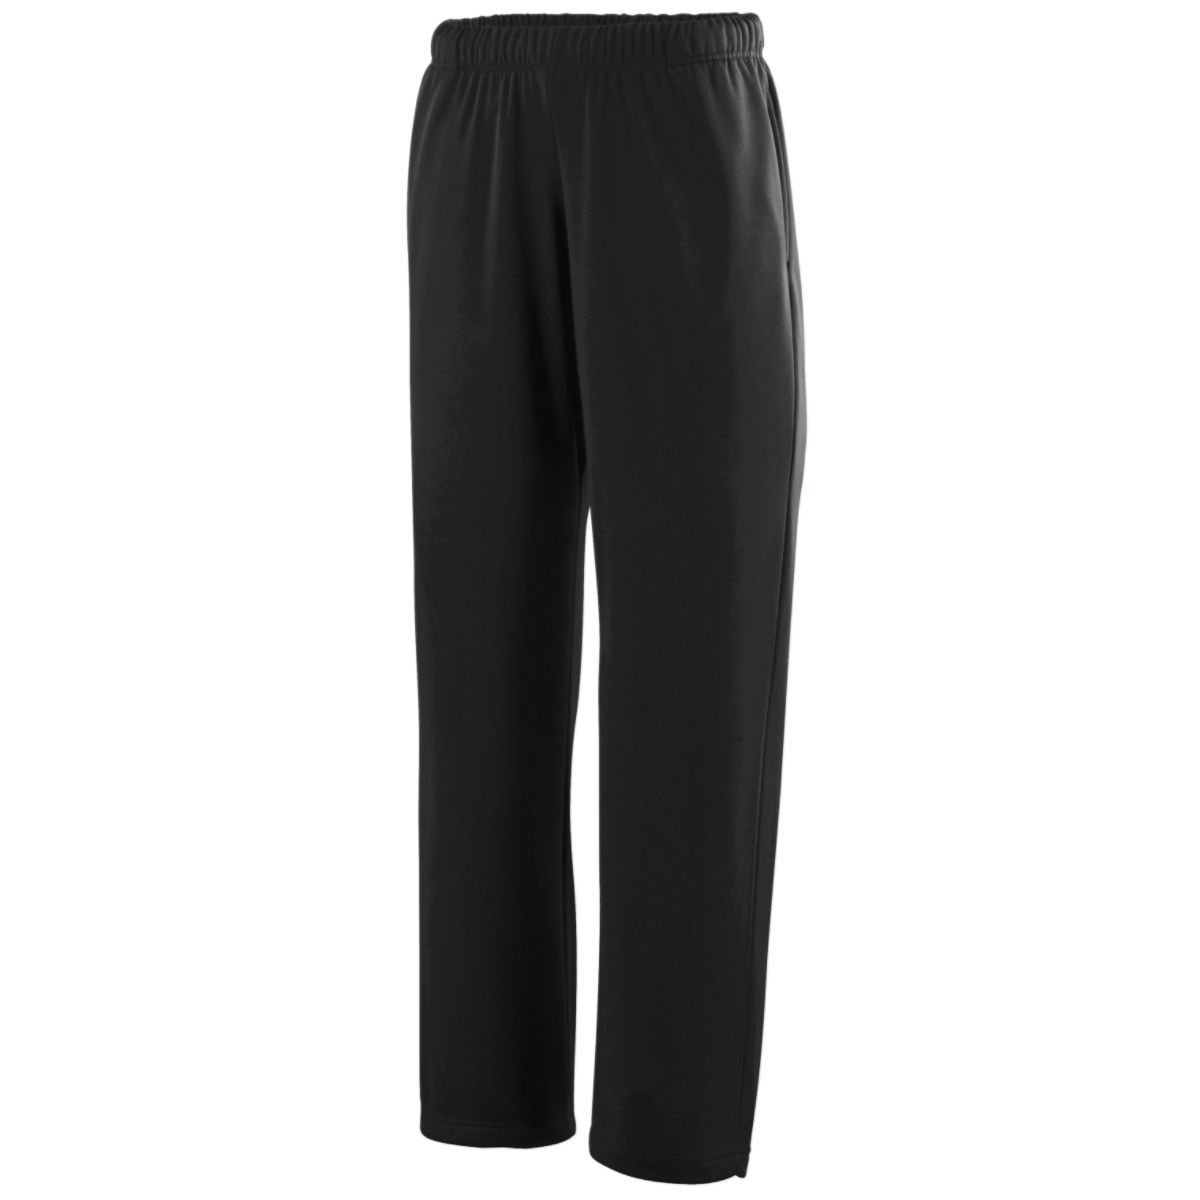 Augusta Sportswear Youth Wicking Fleece Sweatpant in Black  -Part of the Youth, Youth-Pants, Pants, Augusta-Products product lines at KanaleyCreations.com